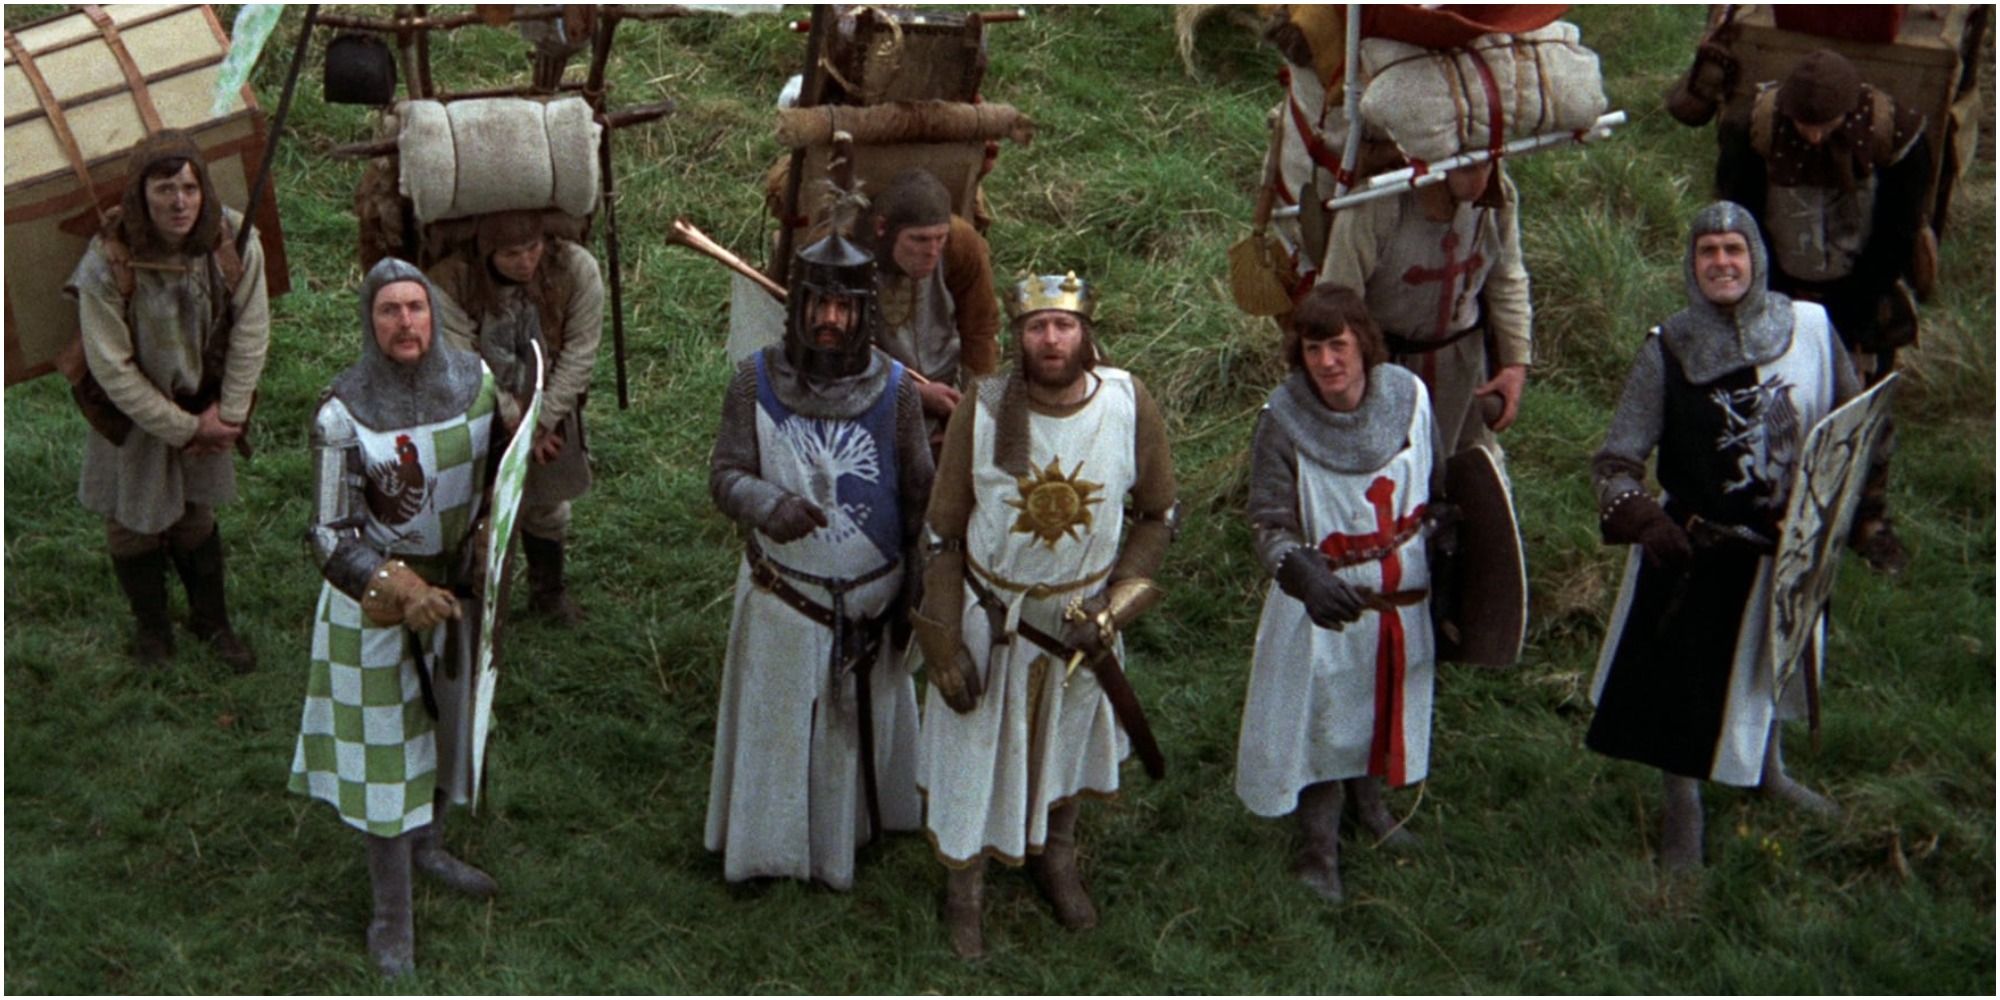 The knights look up at a castle in Monty Python and the Holy Grail